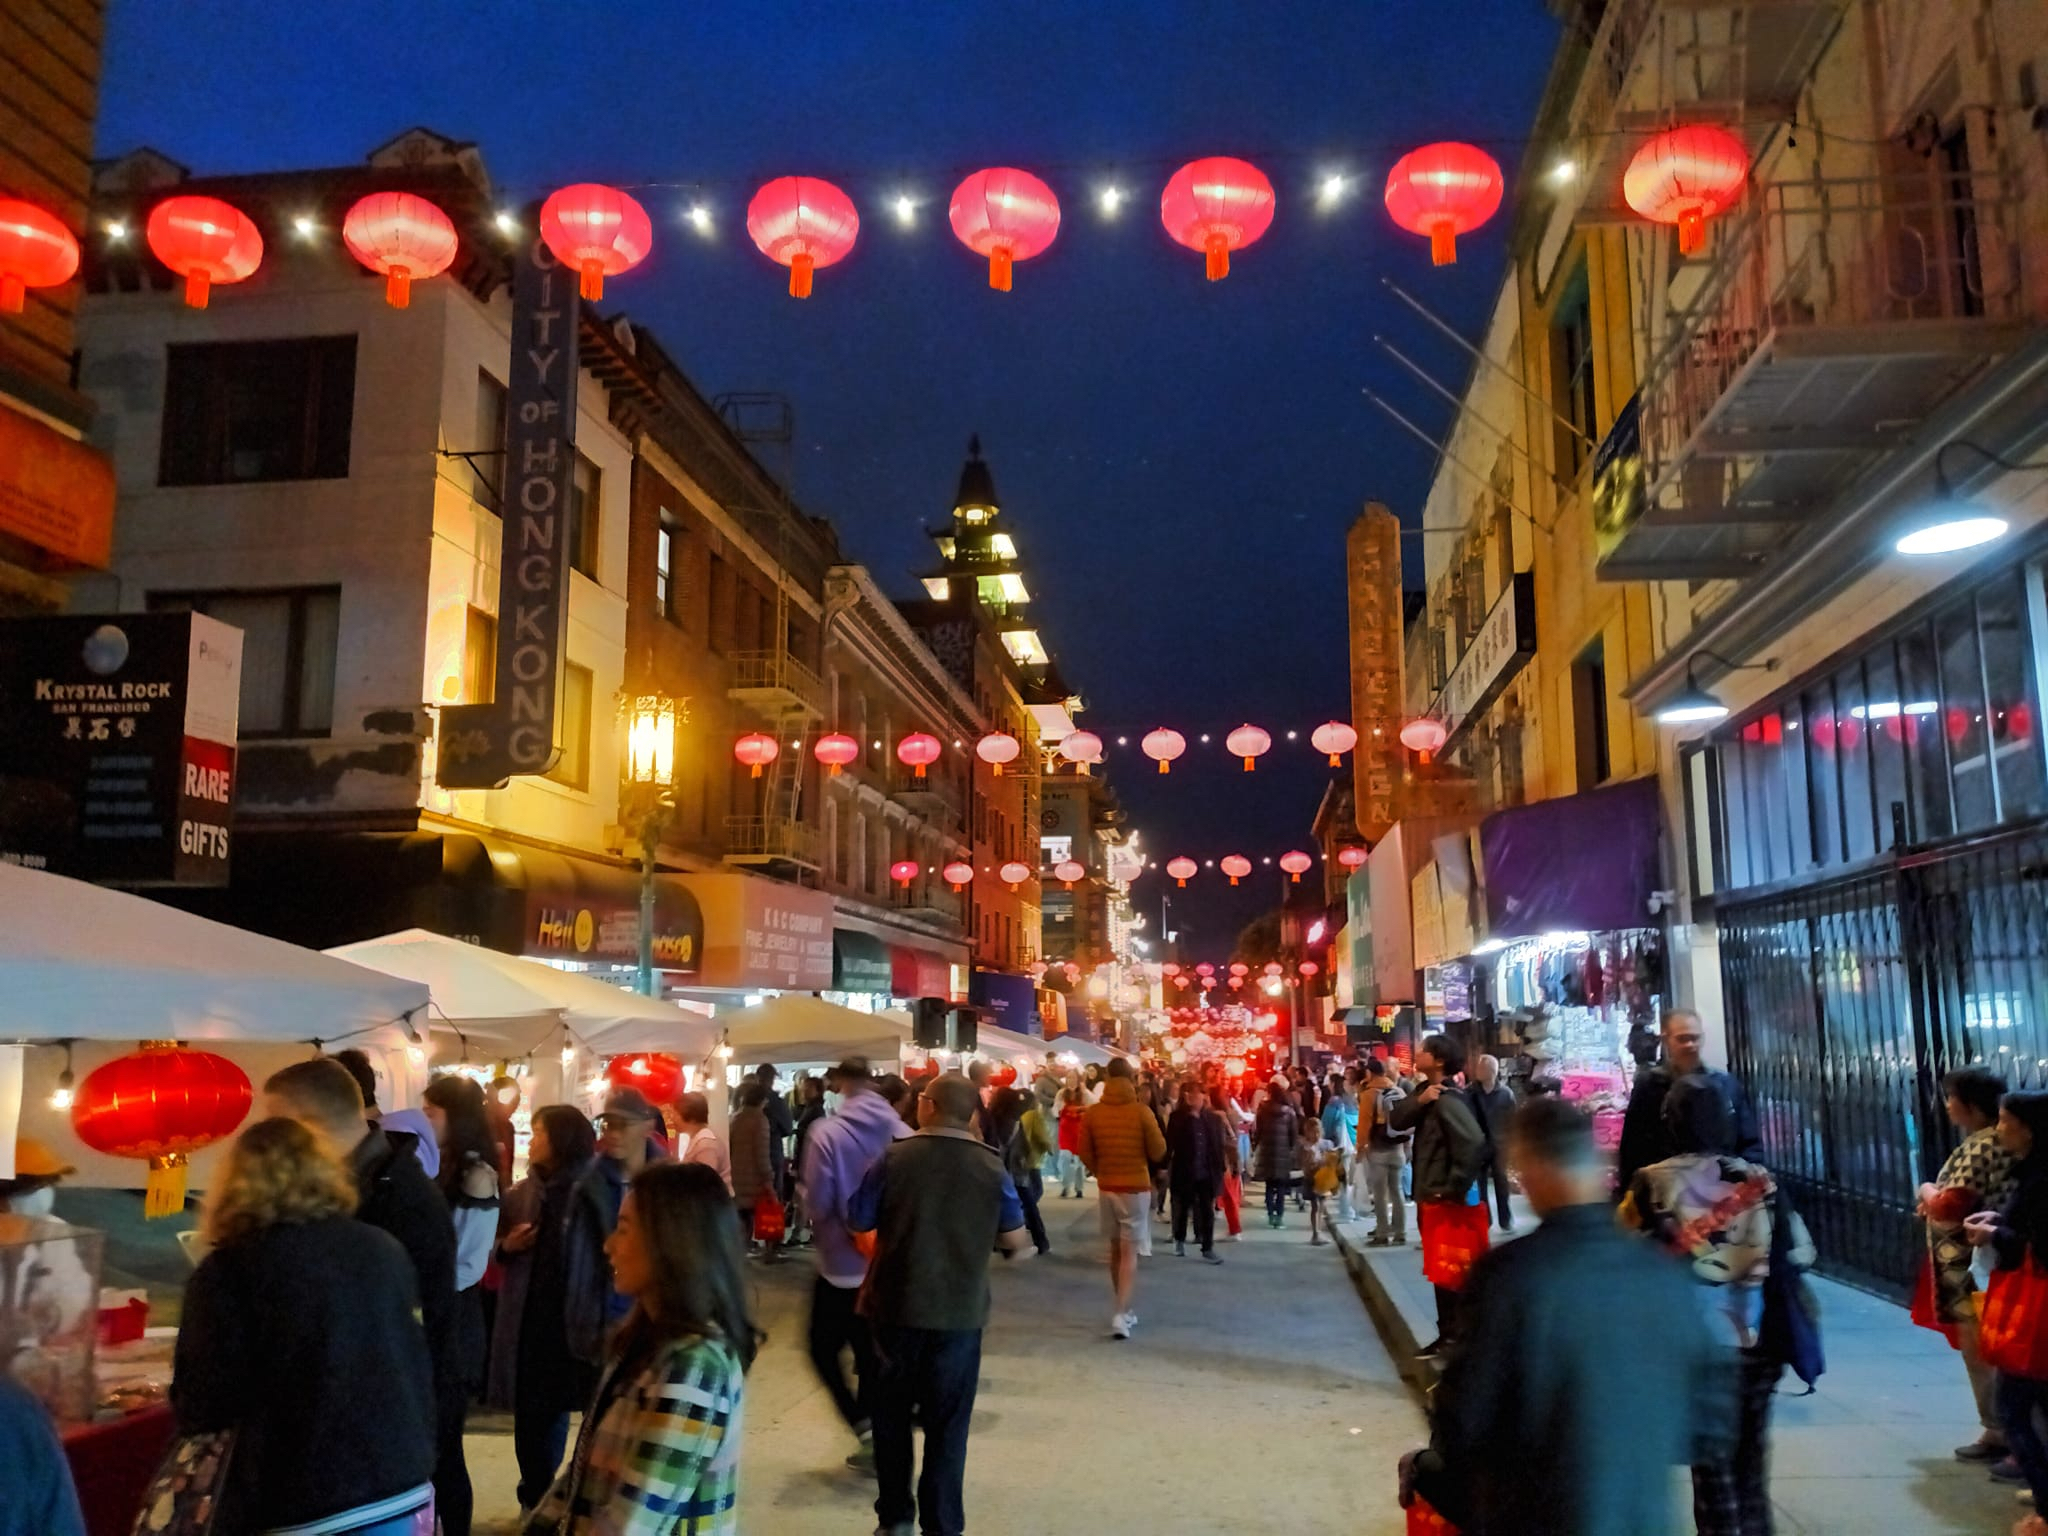 A night market will brighten Grant Avenue and bring an array of delicacies to San Francisco's Chinatown neighborhood Nov. 11-12.